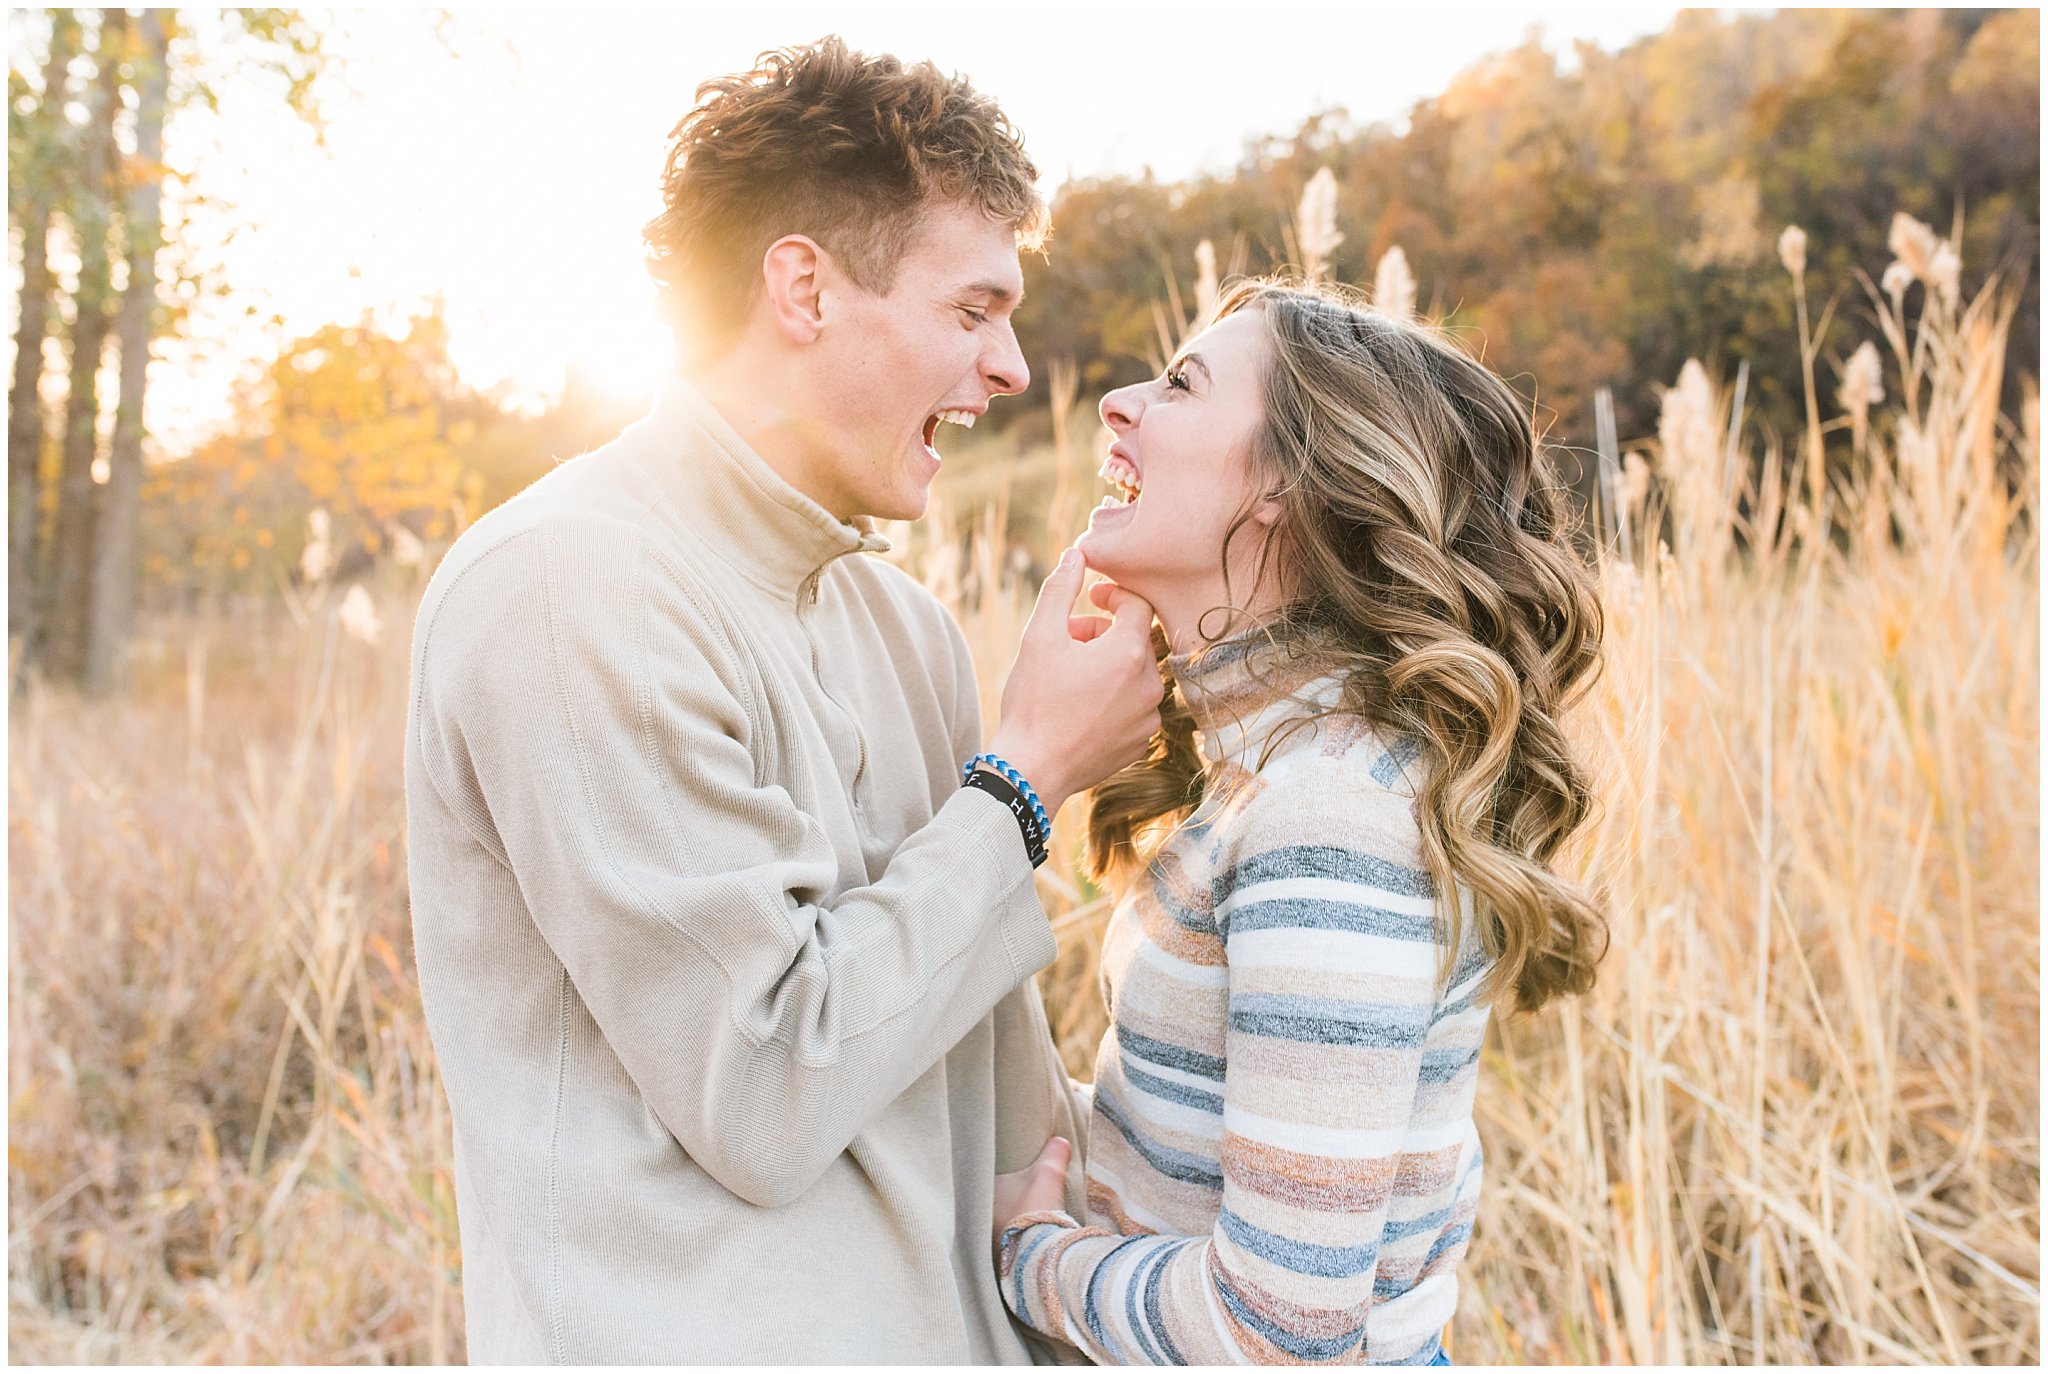 Candid photos of couple in casual cream colored fall sweaters | Utah Fall Engagement Session in a Golden Field | Jessie and Dallin Photography